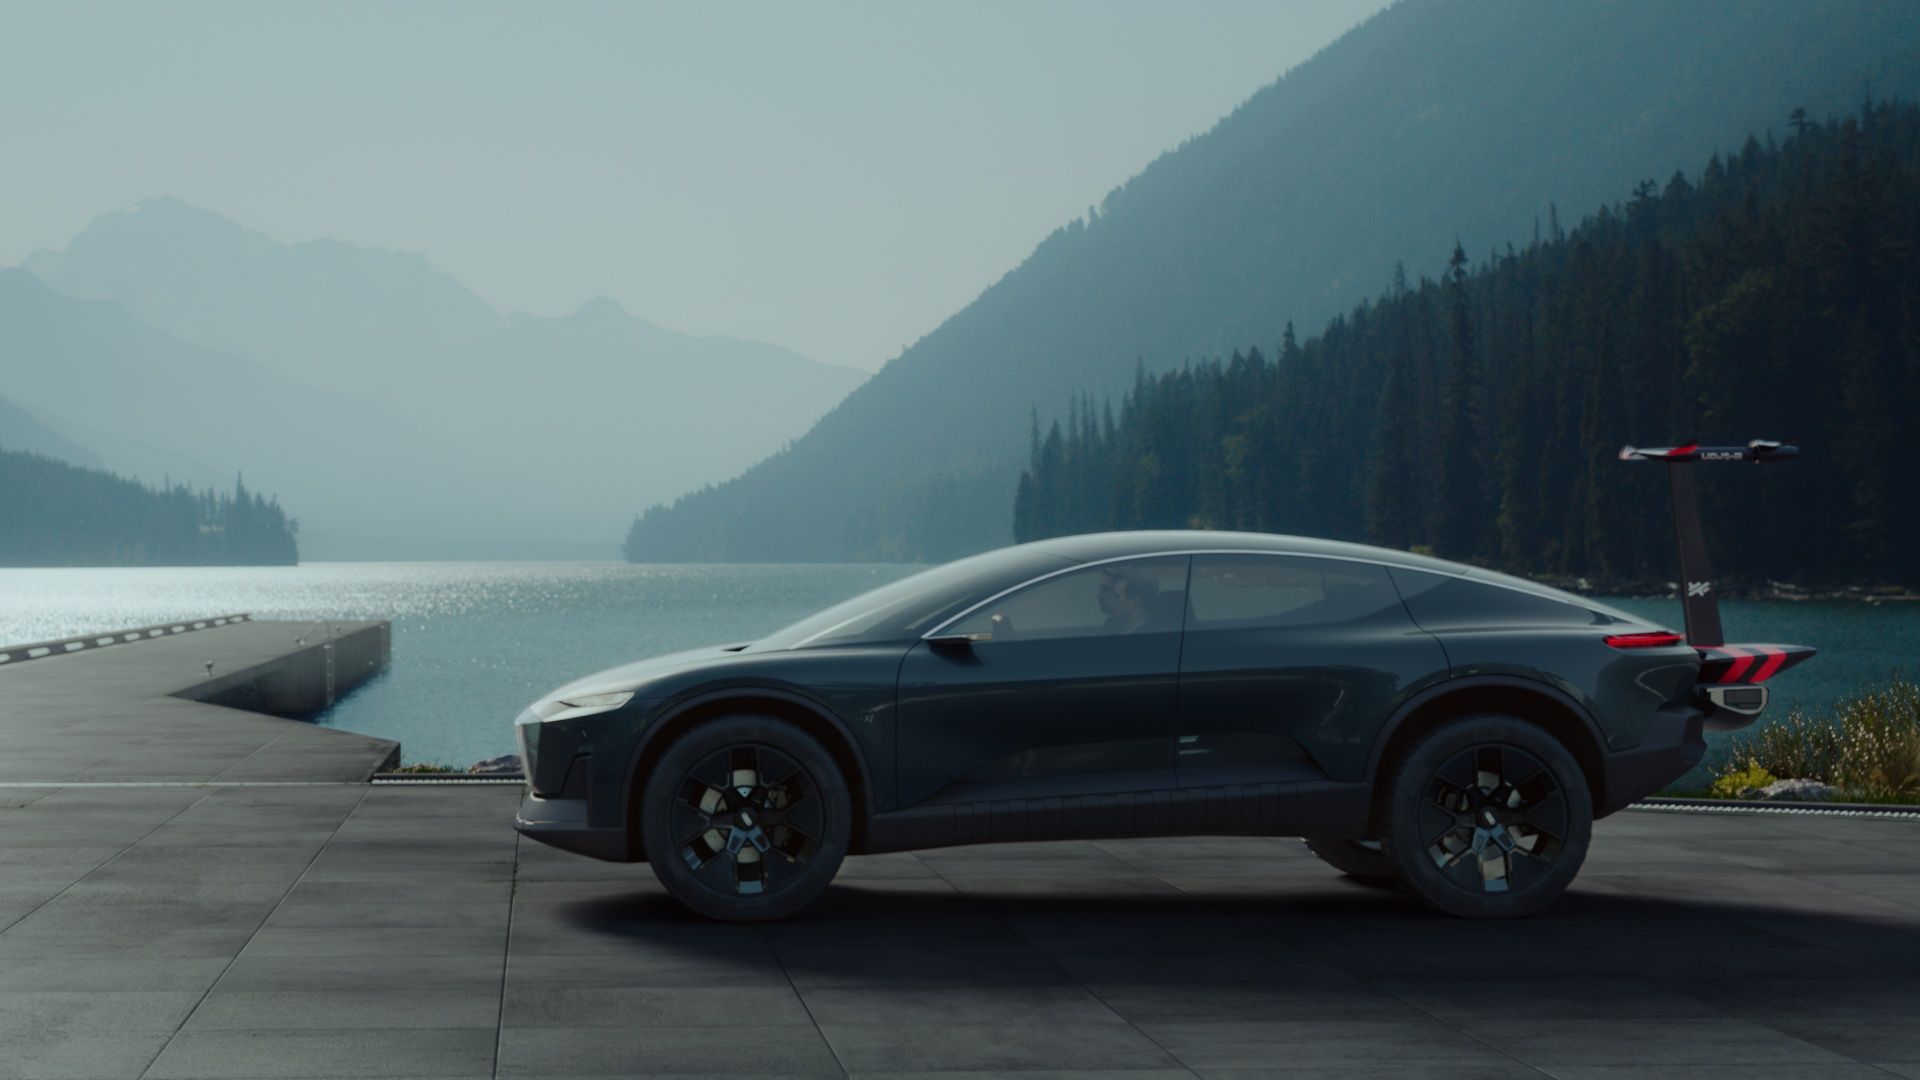 The Audi activesphere concept in front of a lake landscape.